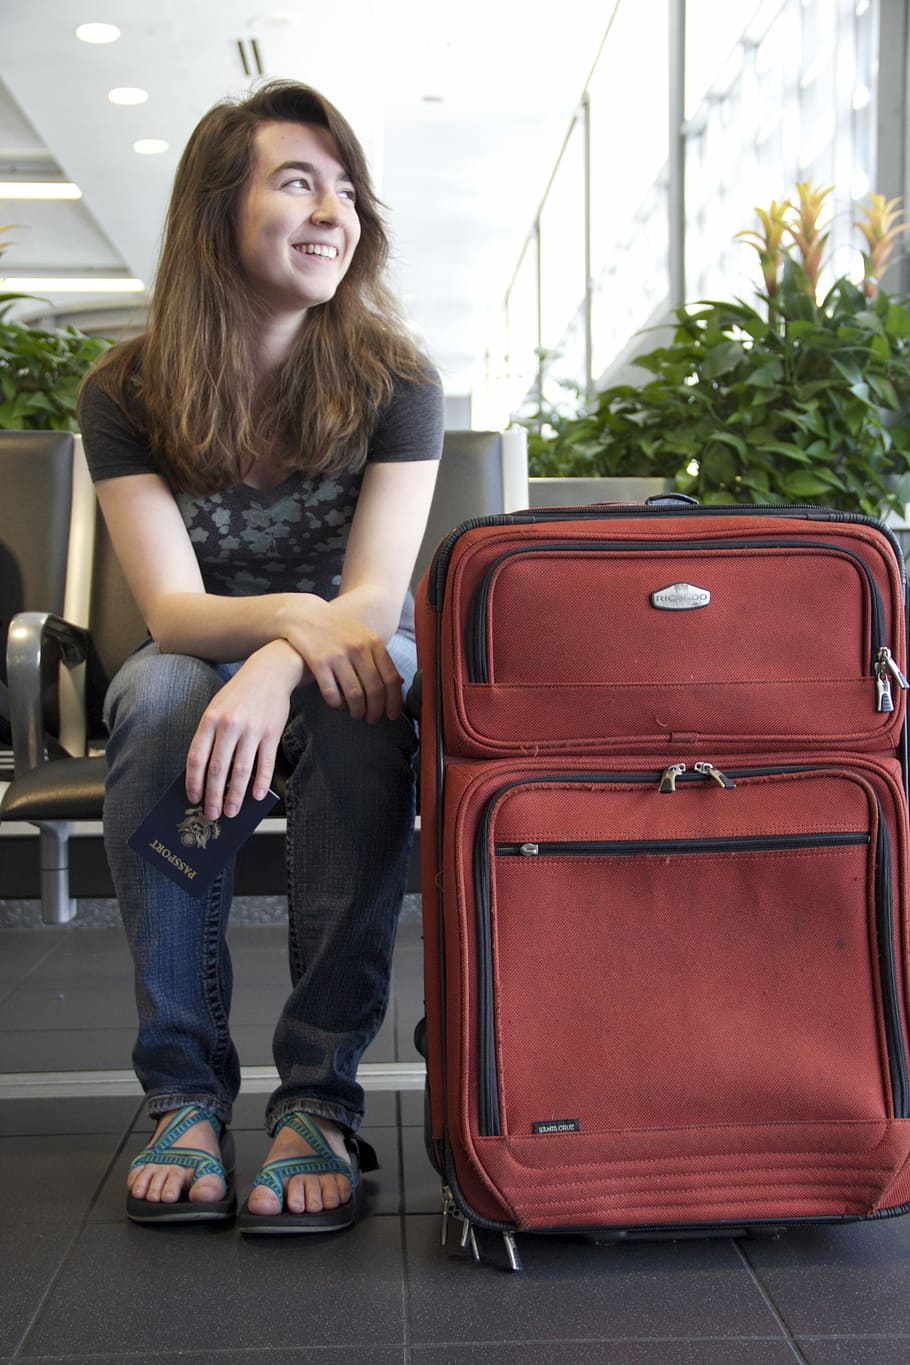 woman, sitting, Travel, Luggage, Journey, Airport, vacation, young, female, suitcase